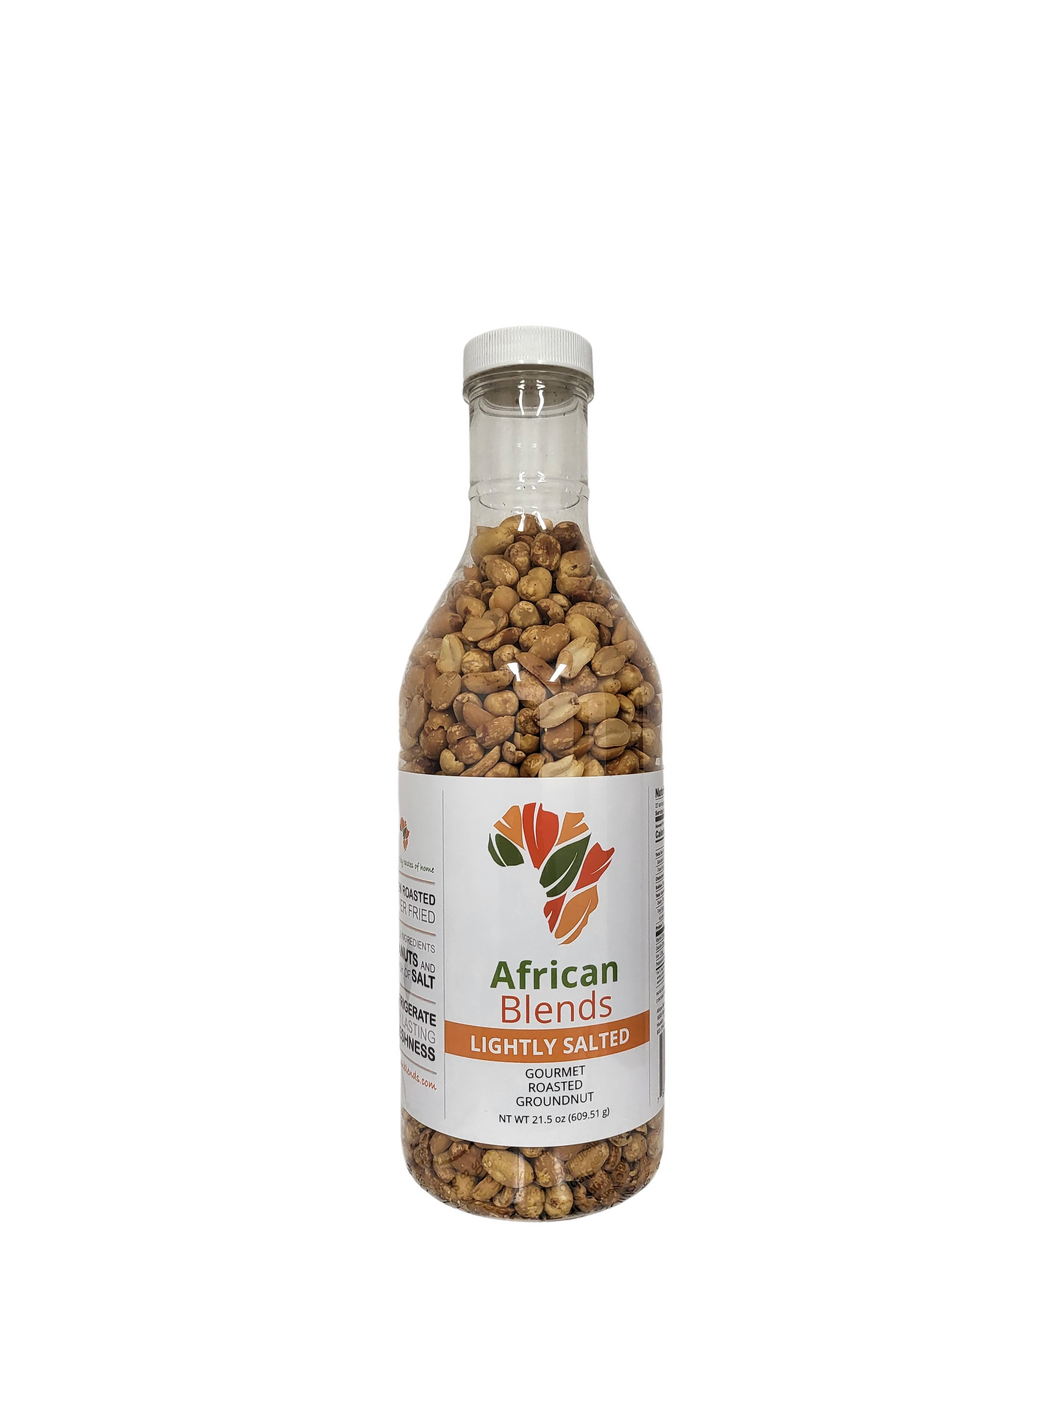 Roasted Groundnut (Peanuts) by African Blends